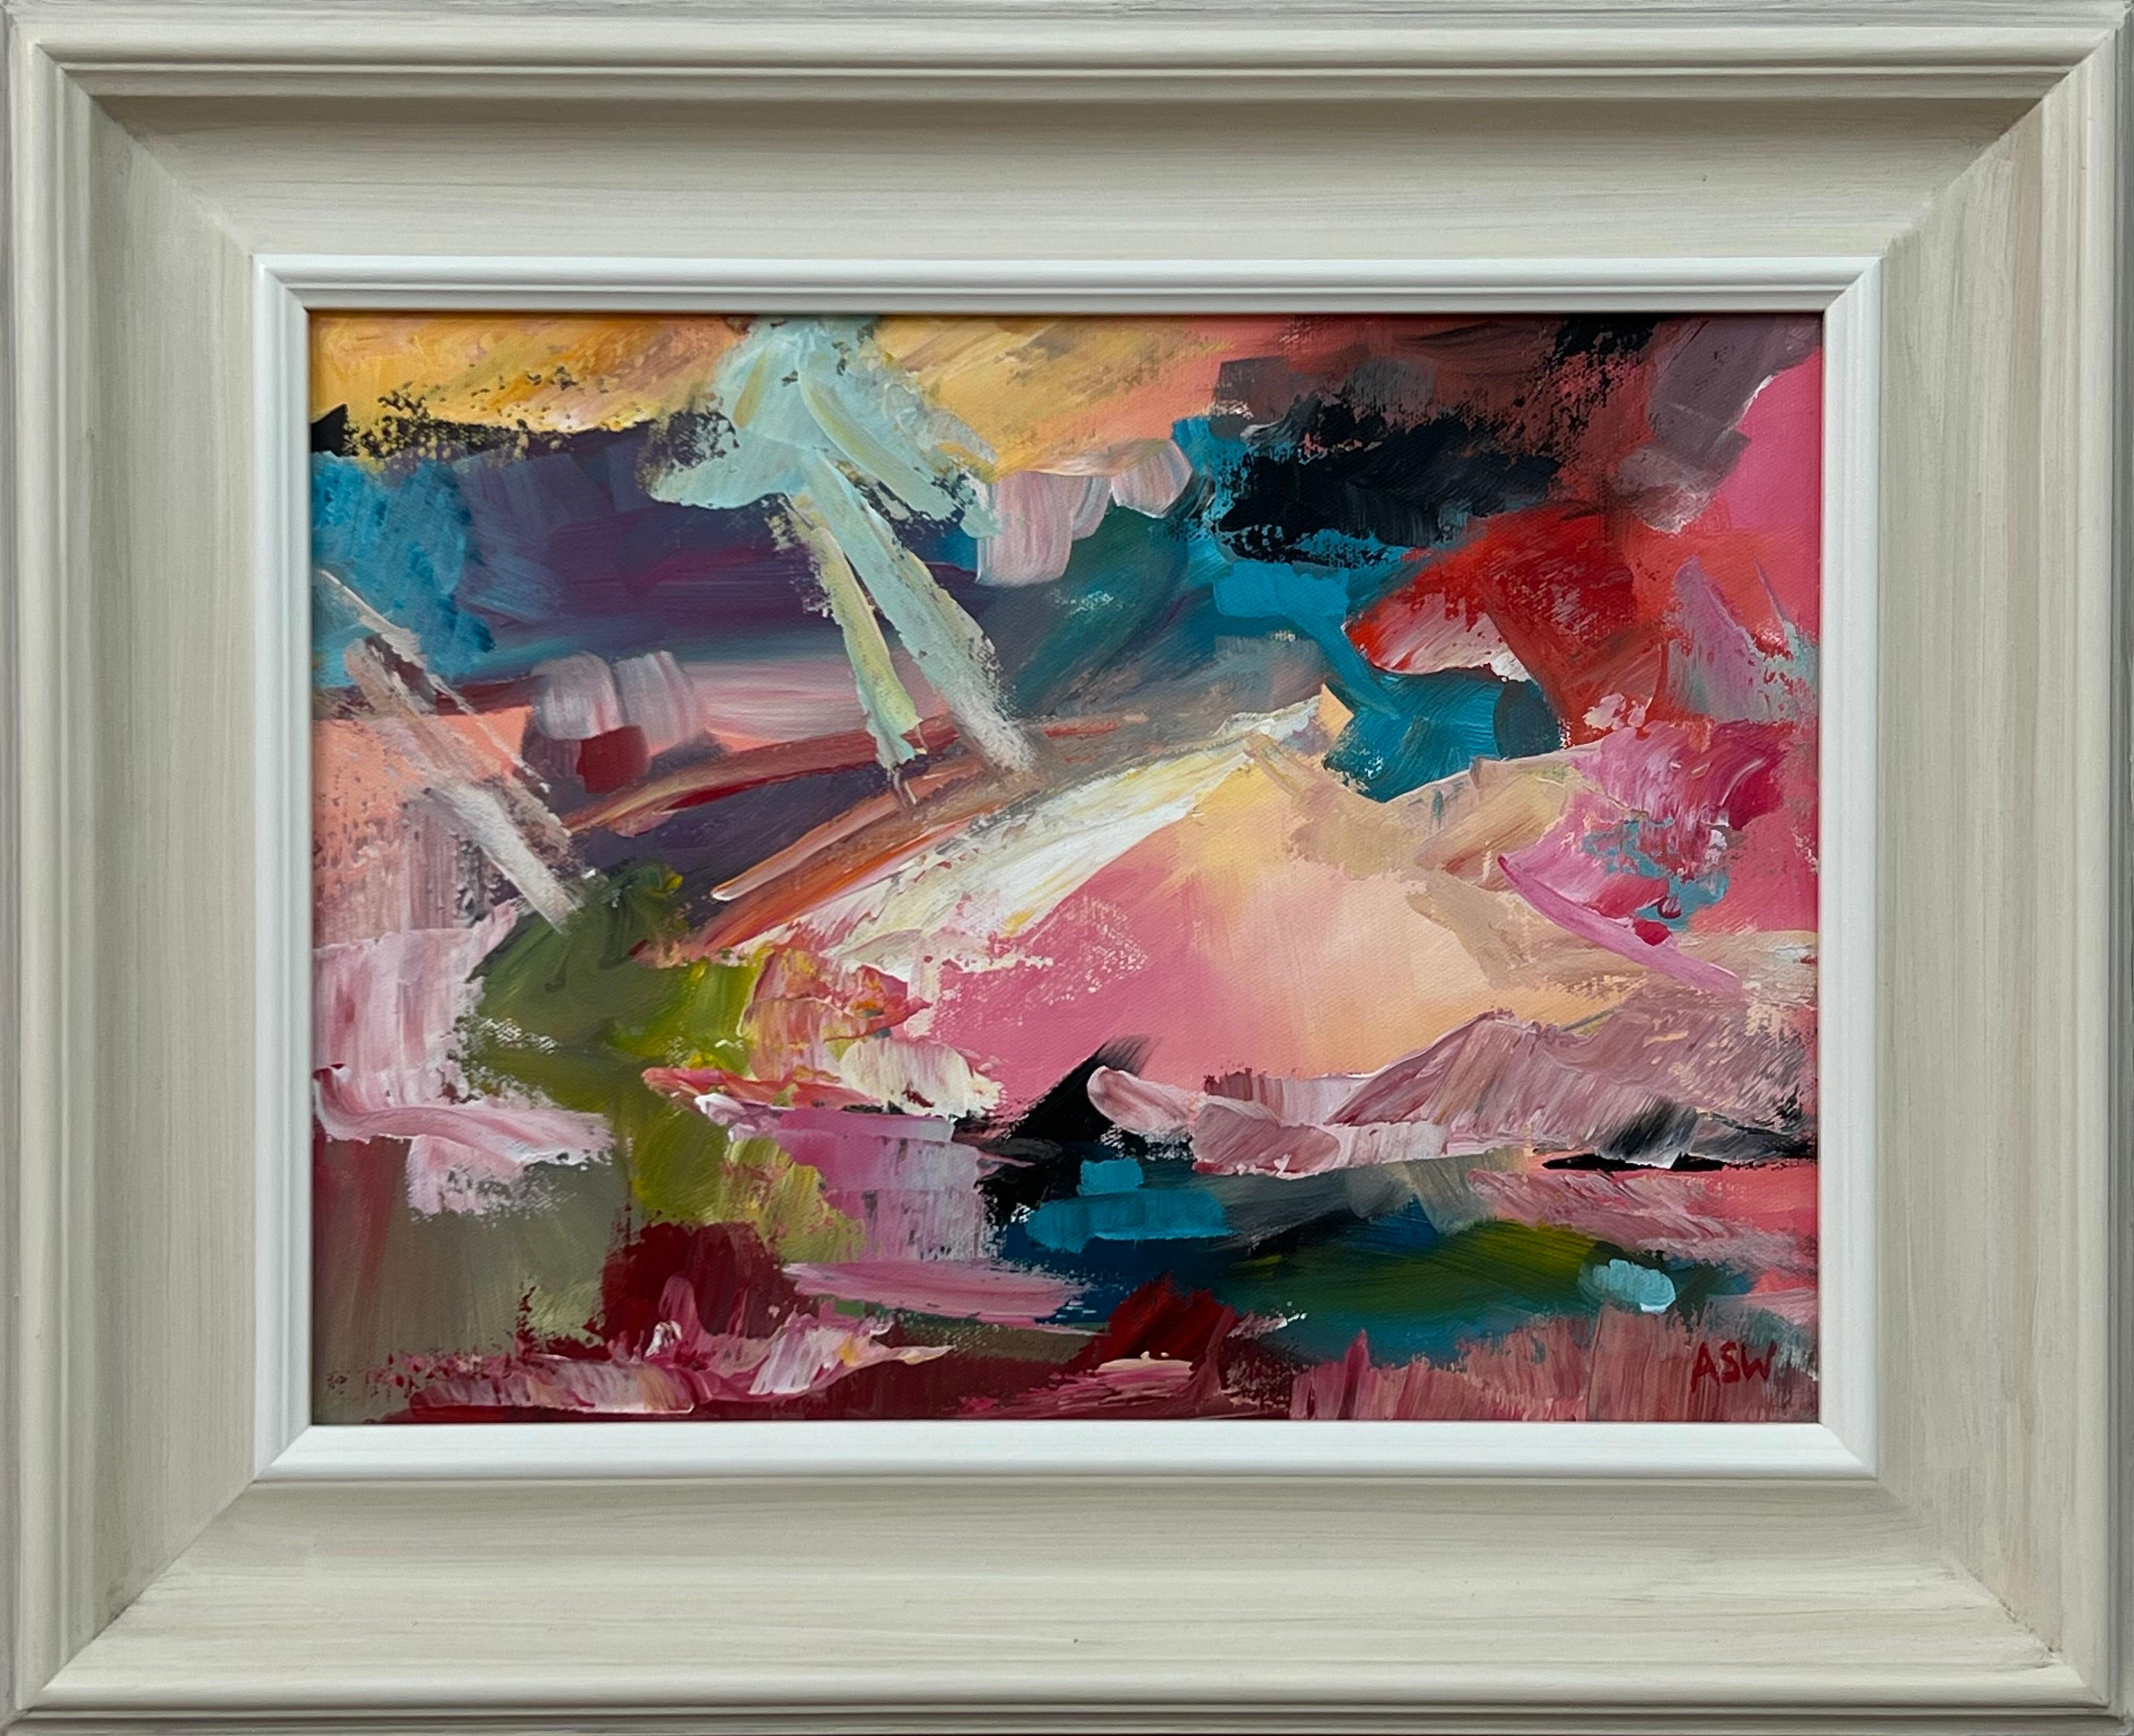 Angela Wakefield Landscape Painting - Pink & Turquoise Abstract Expressionist Painting by Contemporary British Artist